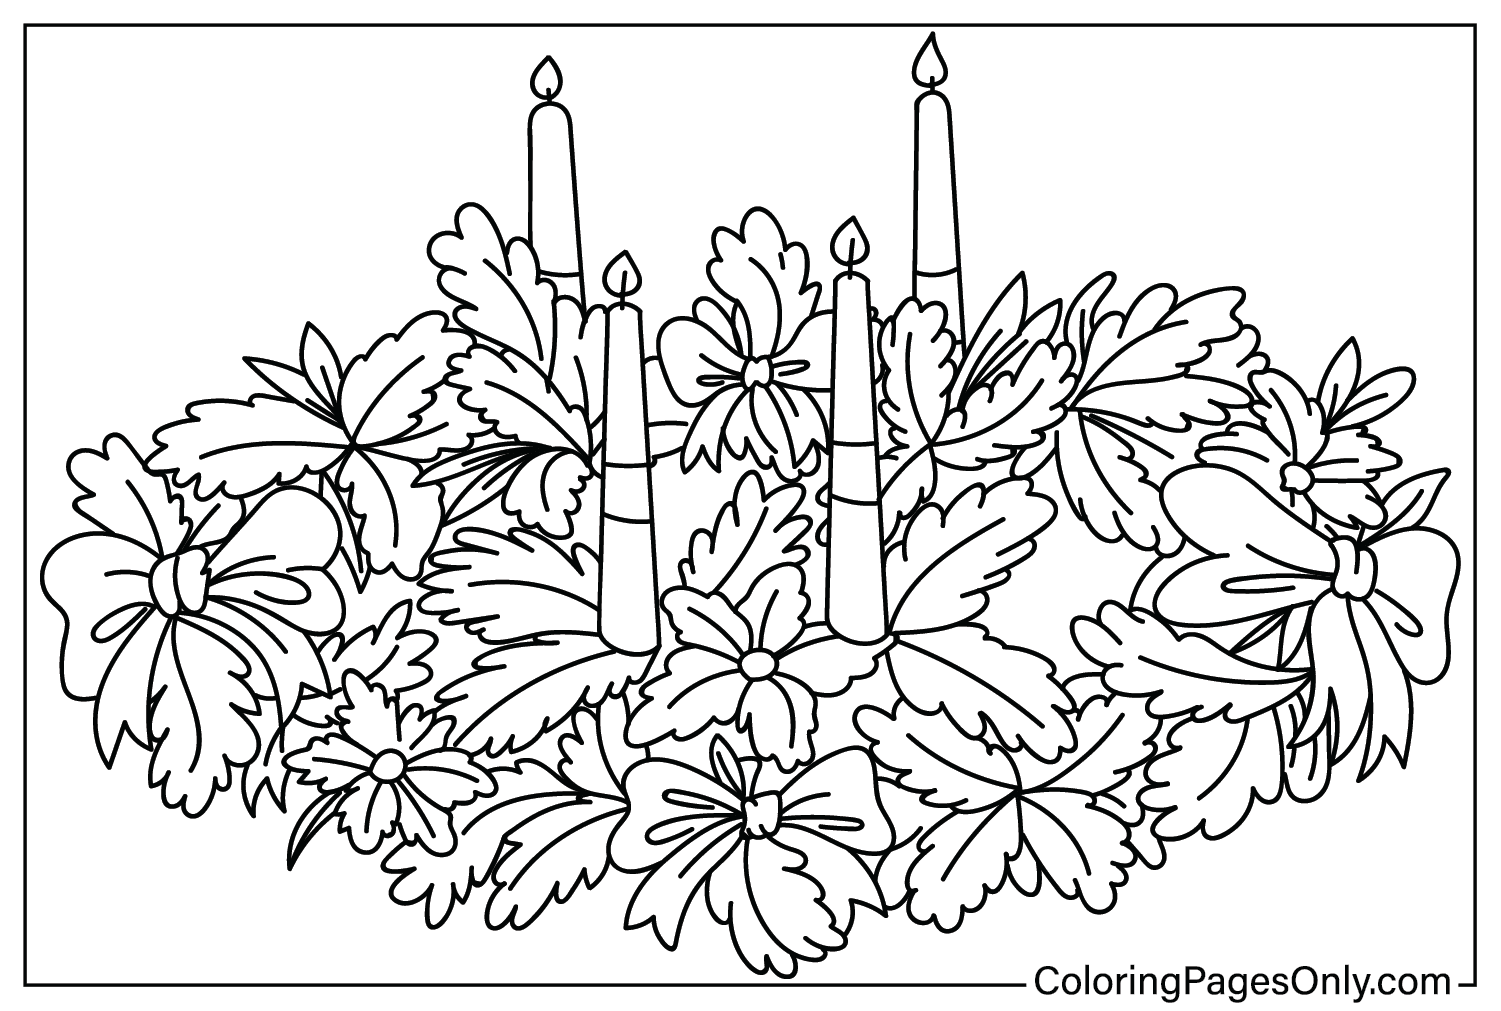 Advent Wreath Coloring Sheet from Advent Wreath